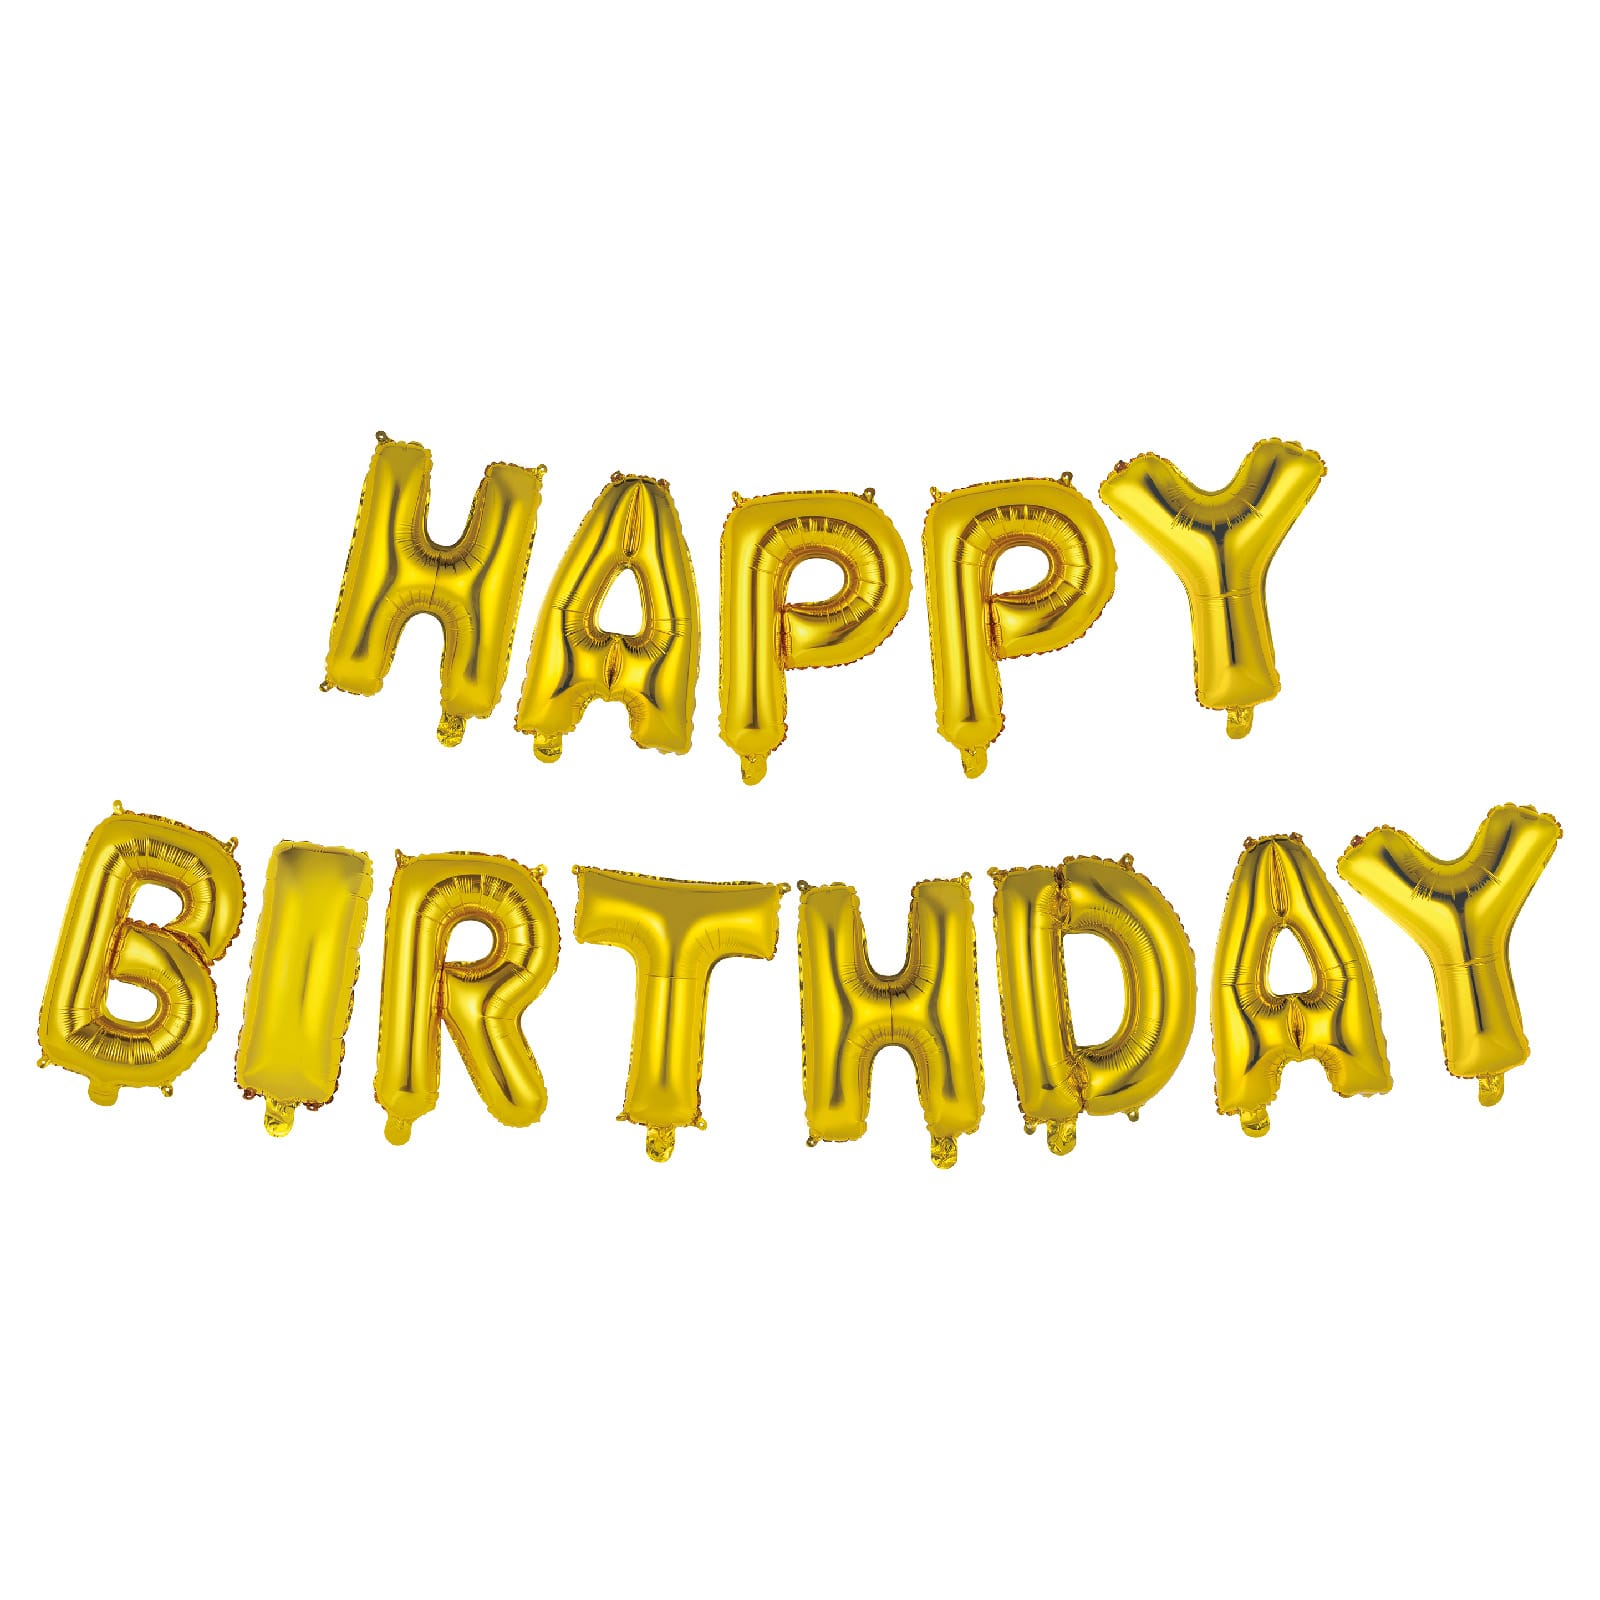 Gold Happy Birthday Balloon Letters With 14 Balloons, Birthday Ballon Kit  Includes 13 Mylar Balloons 